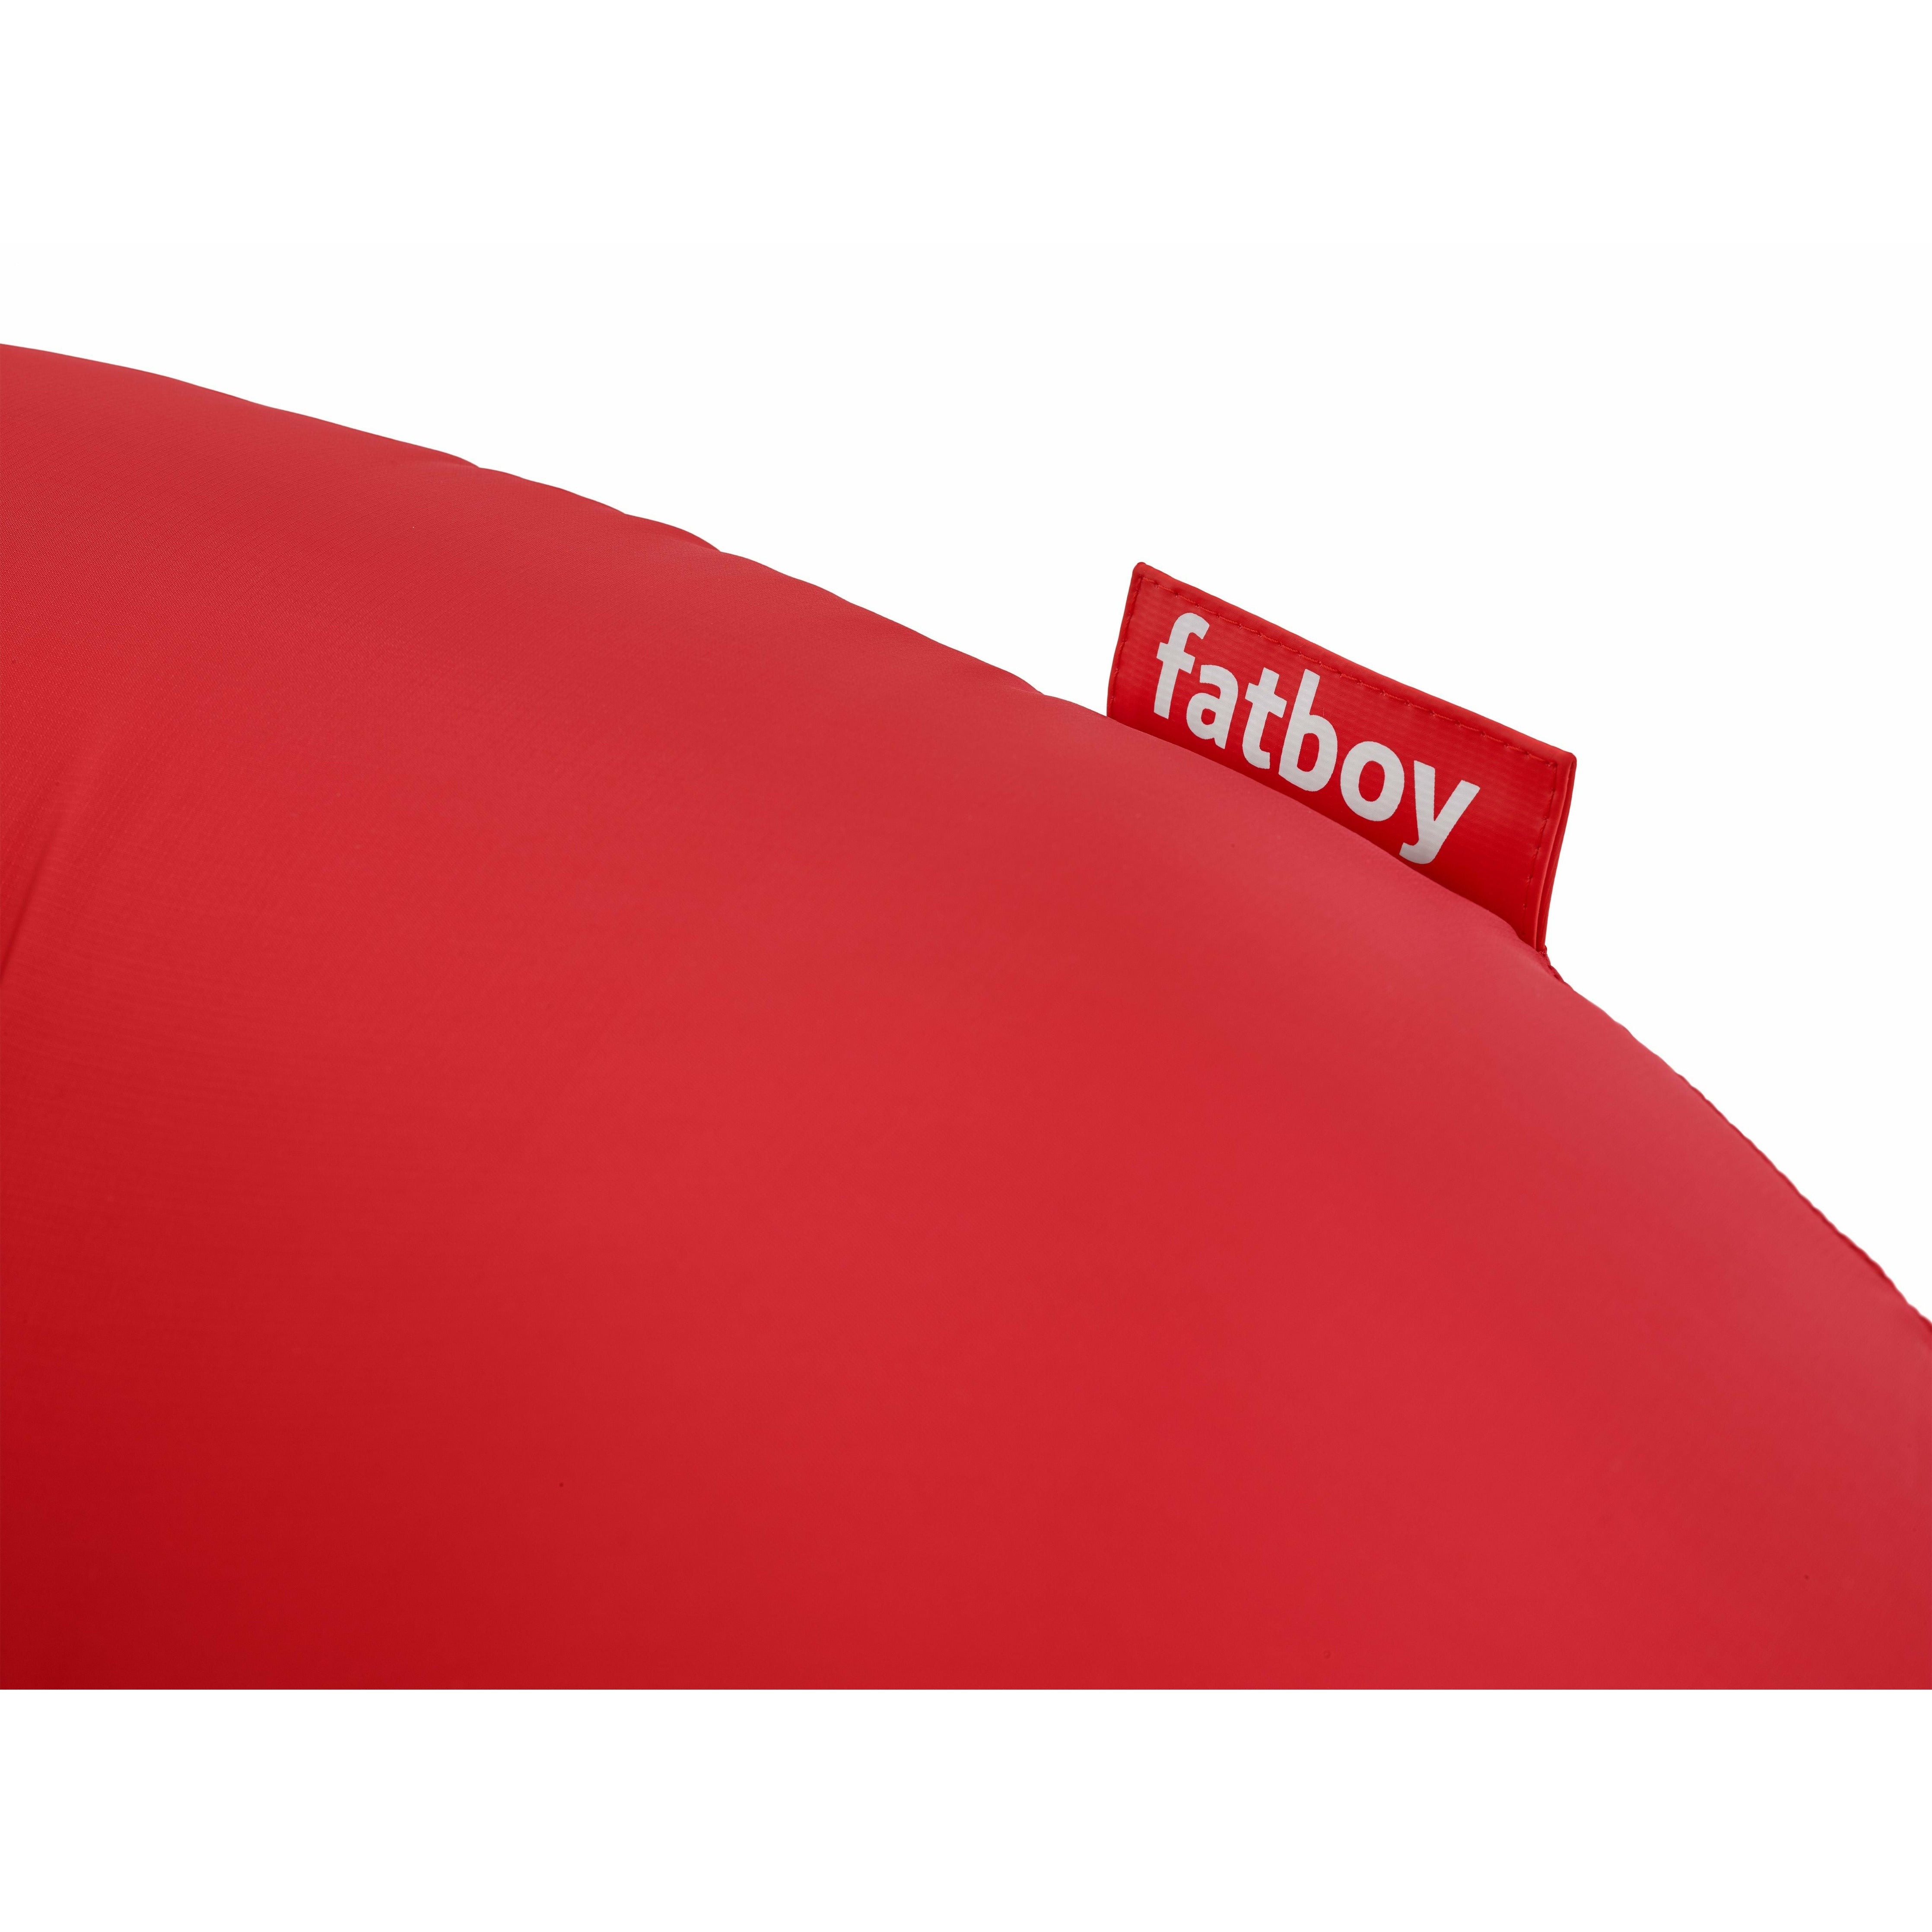 Fatboy Lamzac O Inflatable Seat 3.0, Red